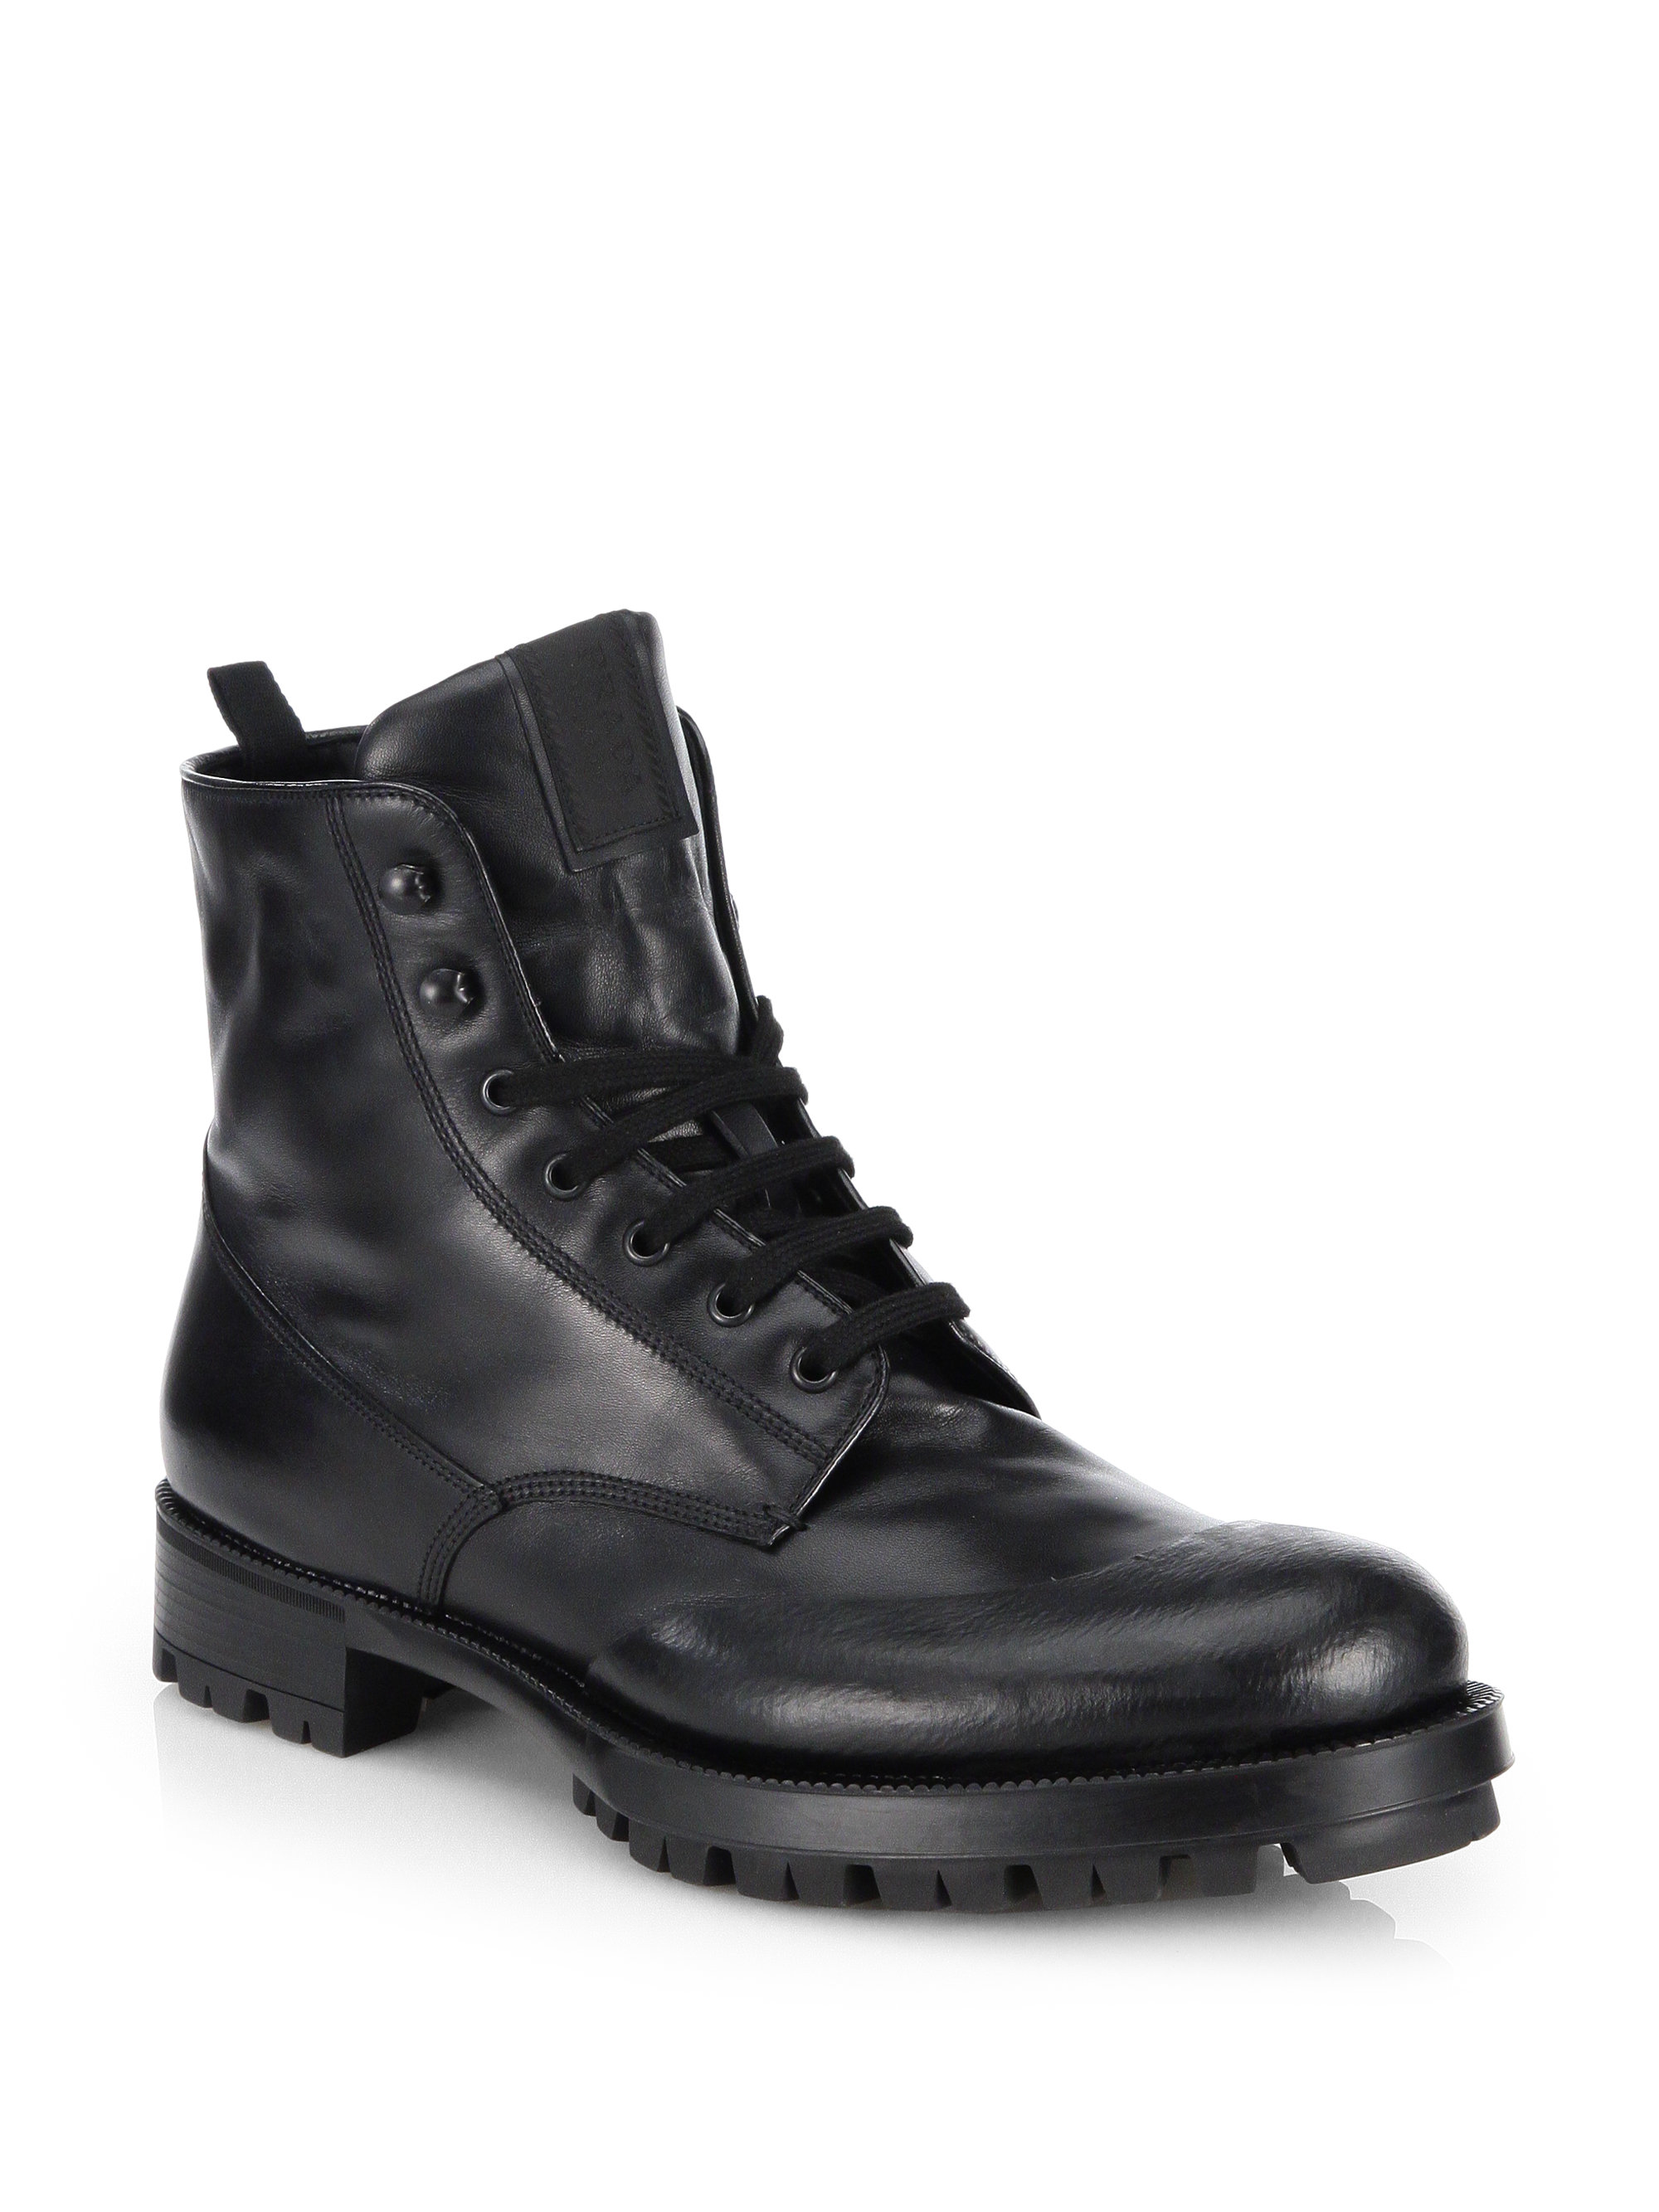 Prada Laceup Leather Combat Boots in Black for Men - Lyst